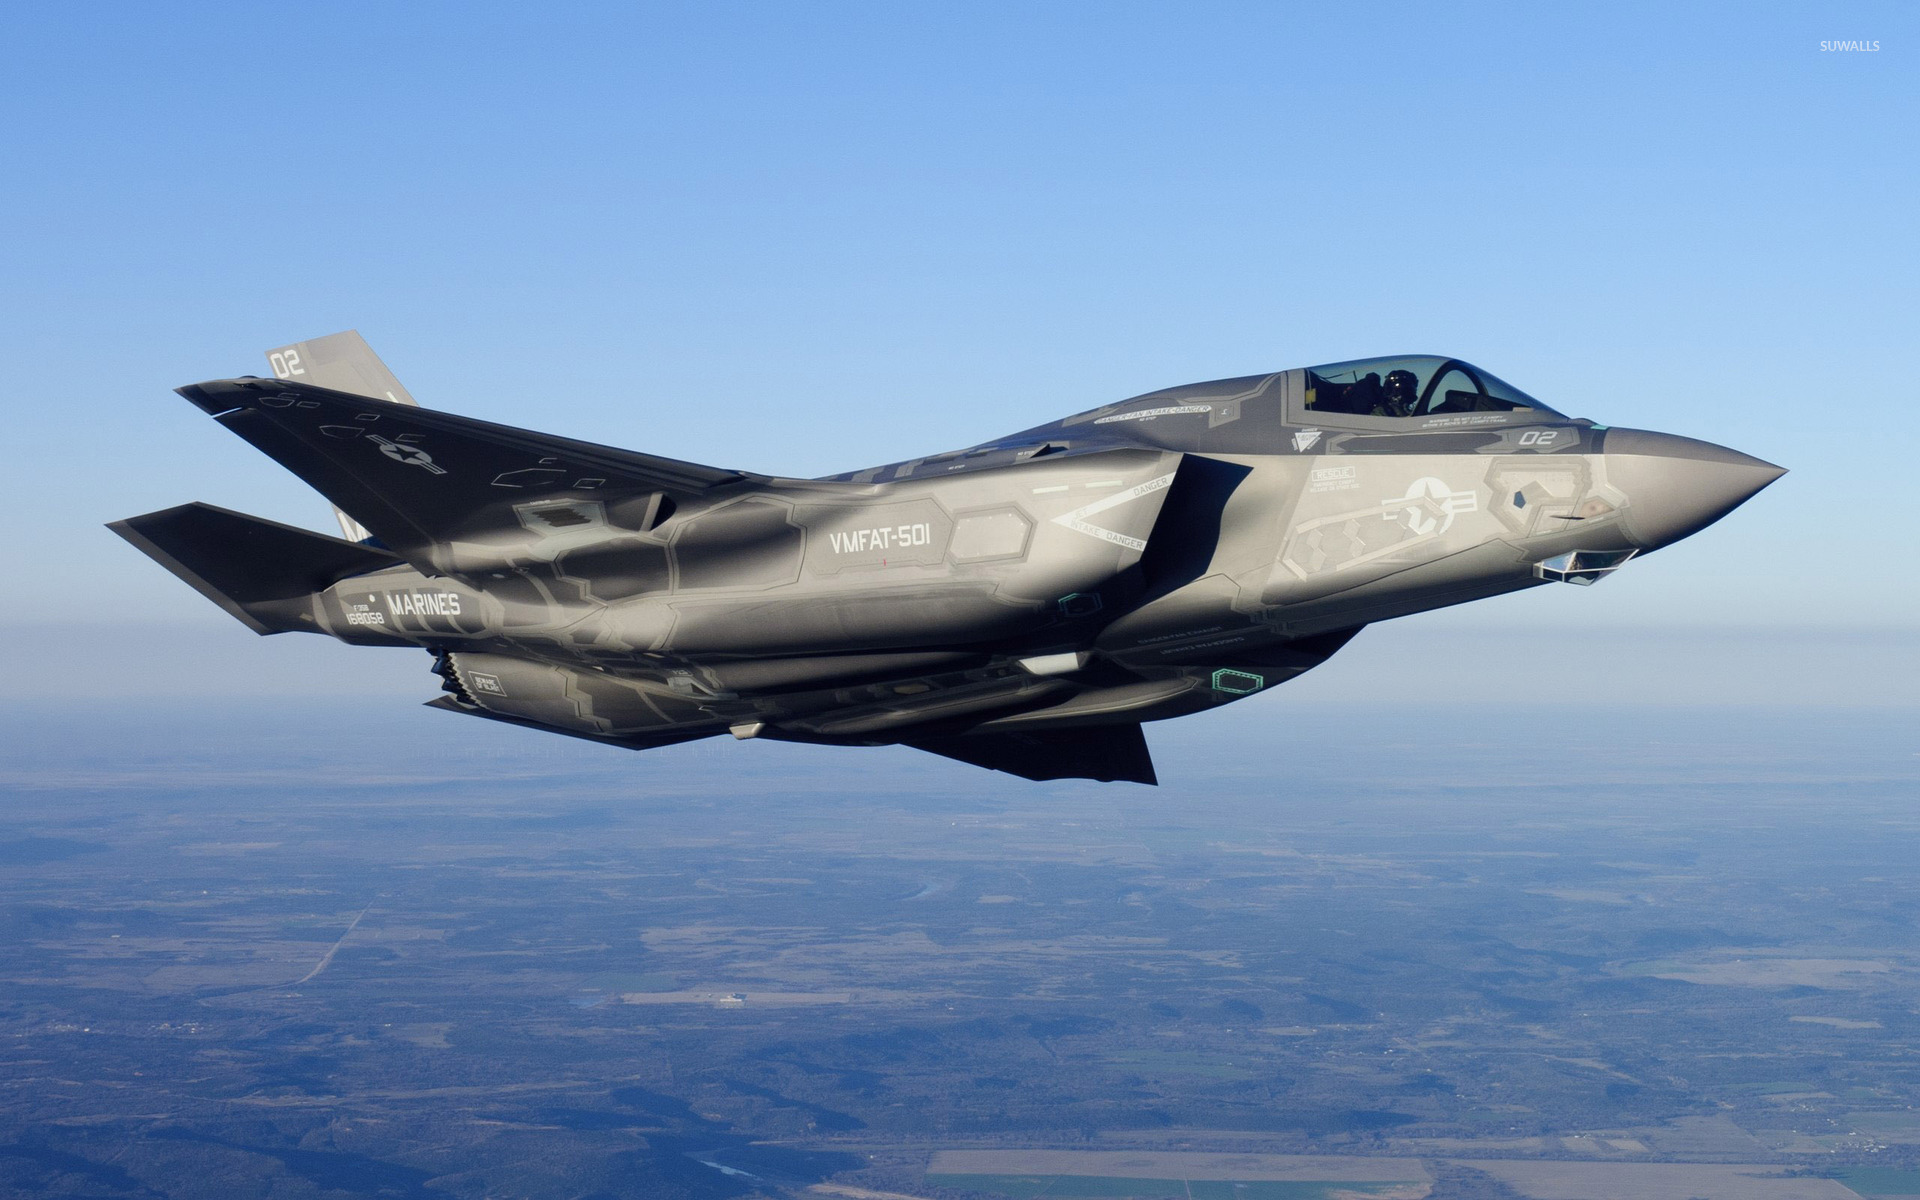 lockheed-martin-f-35-lightning-ii-view-from-a-side-wallpaper-aircraft